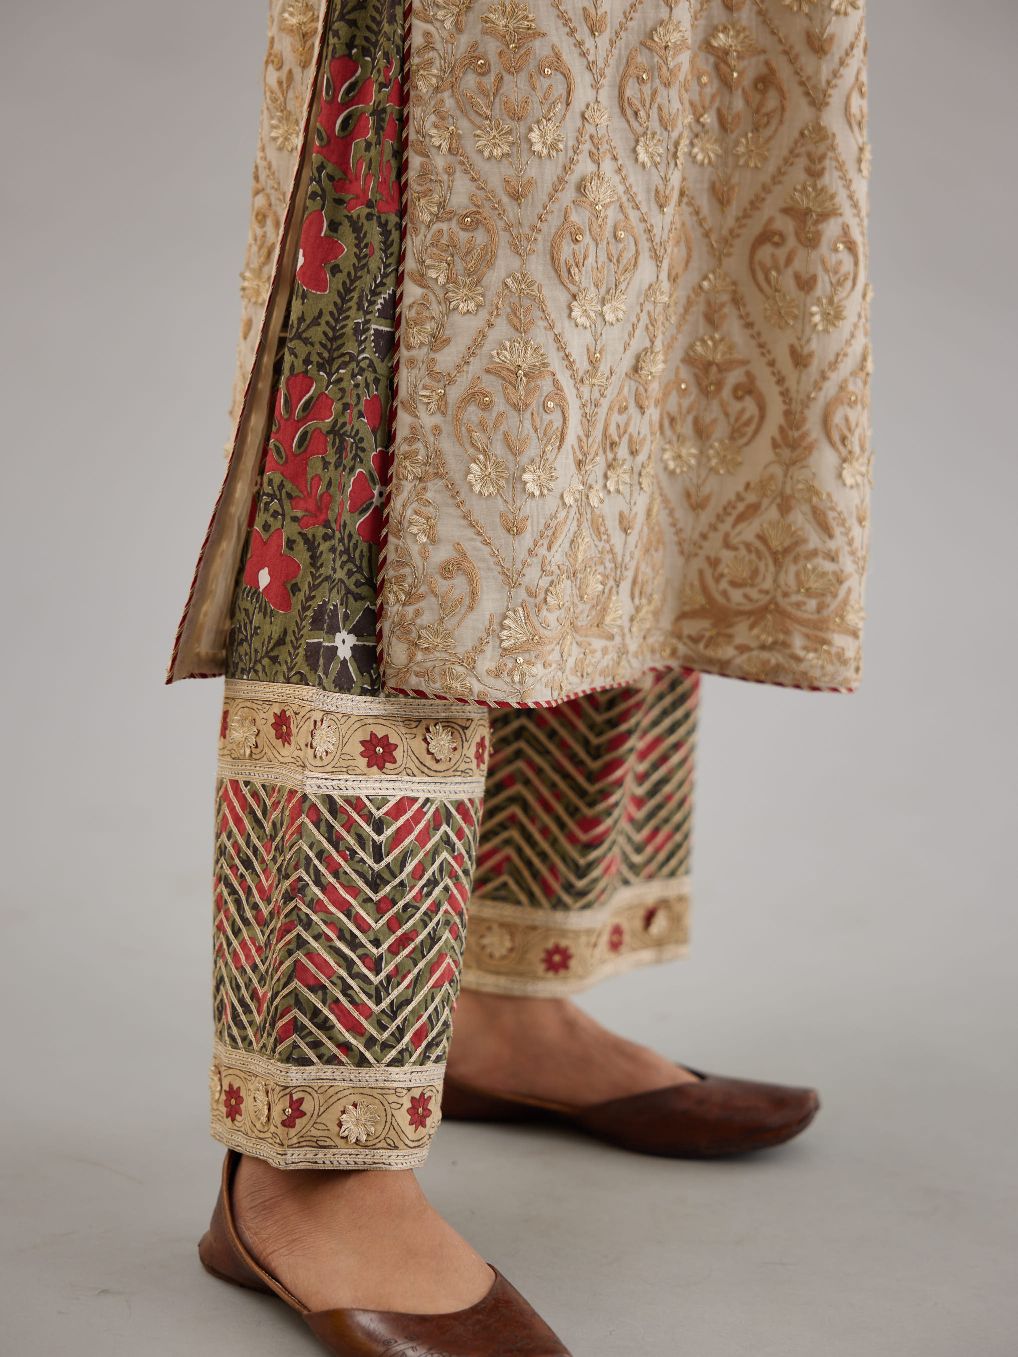 Off white cotton chanderi straight kurta set with all-over dori and gota embroidery, highlighted with gold sequin work.